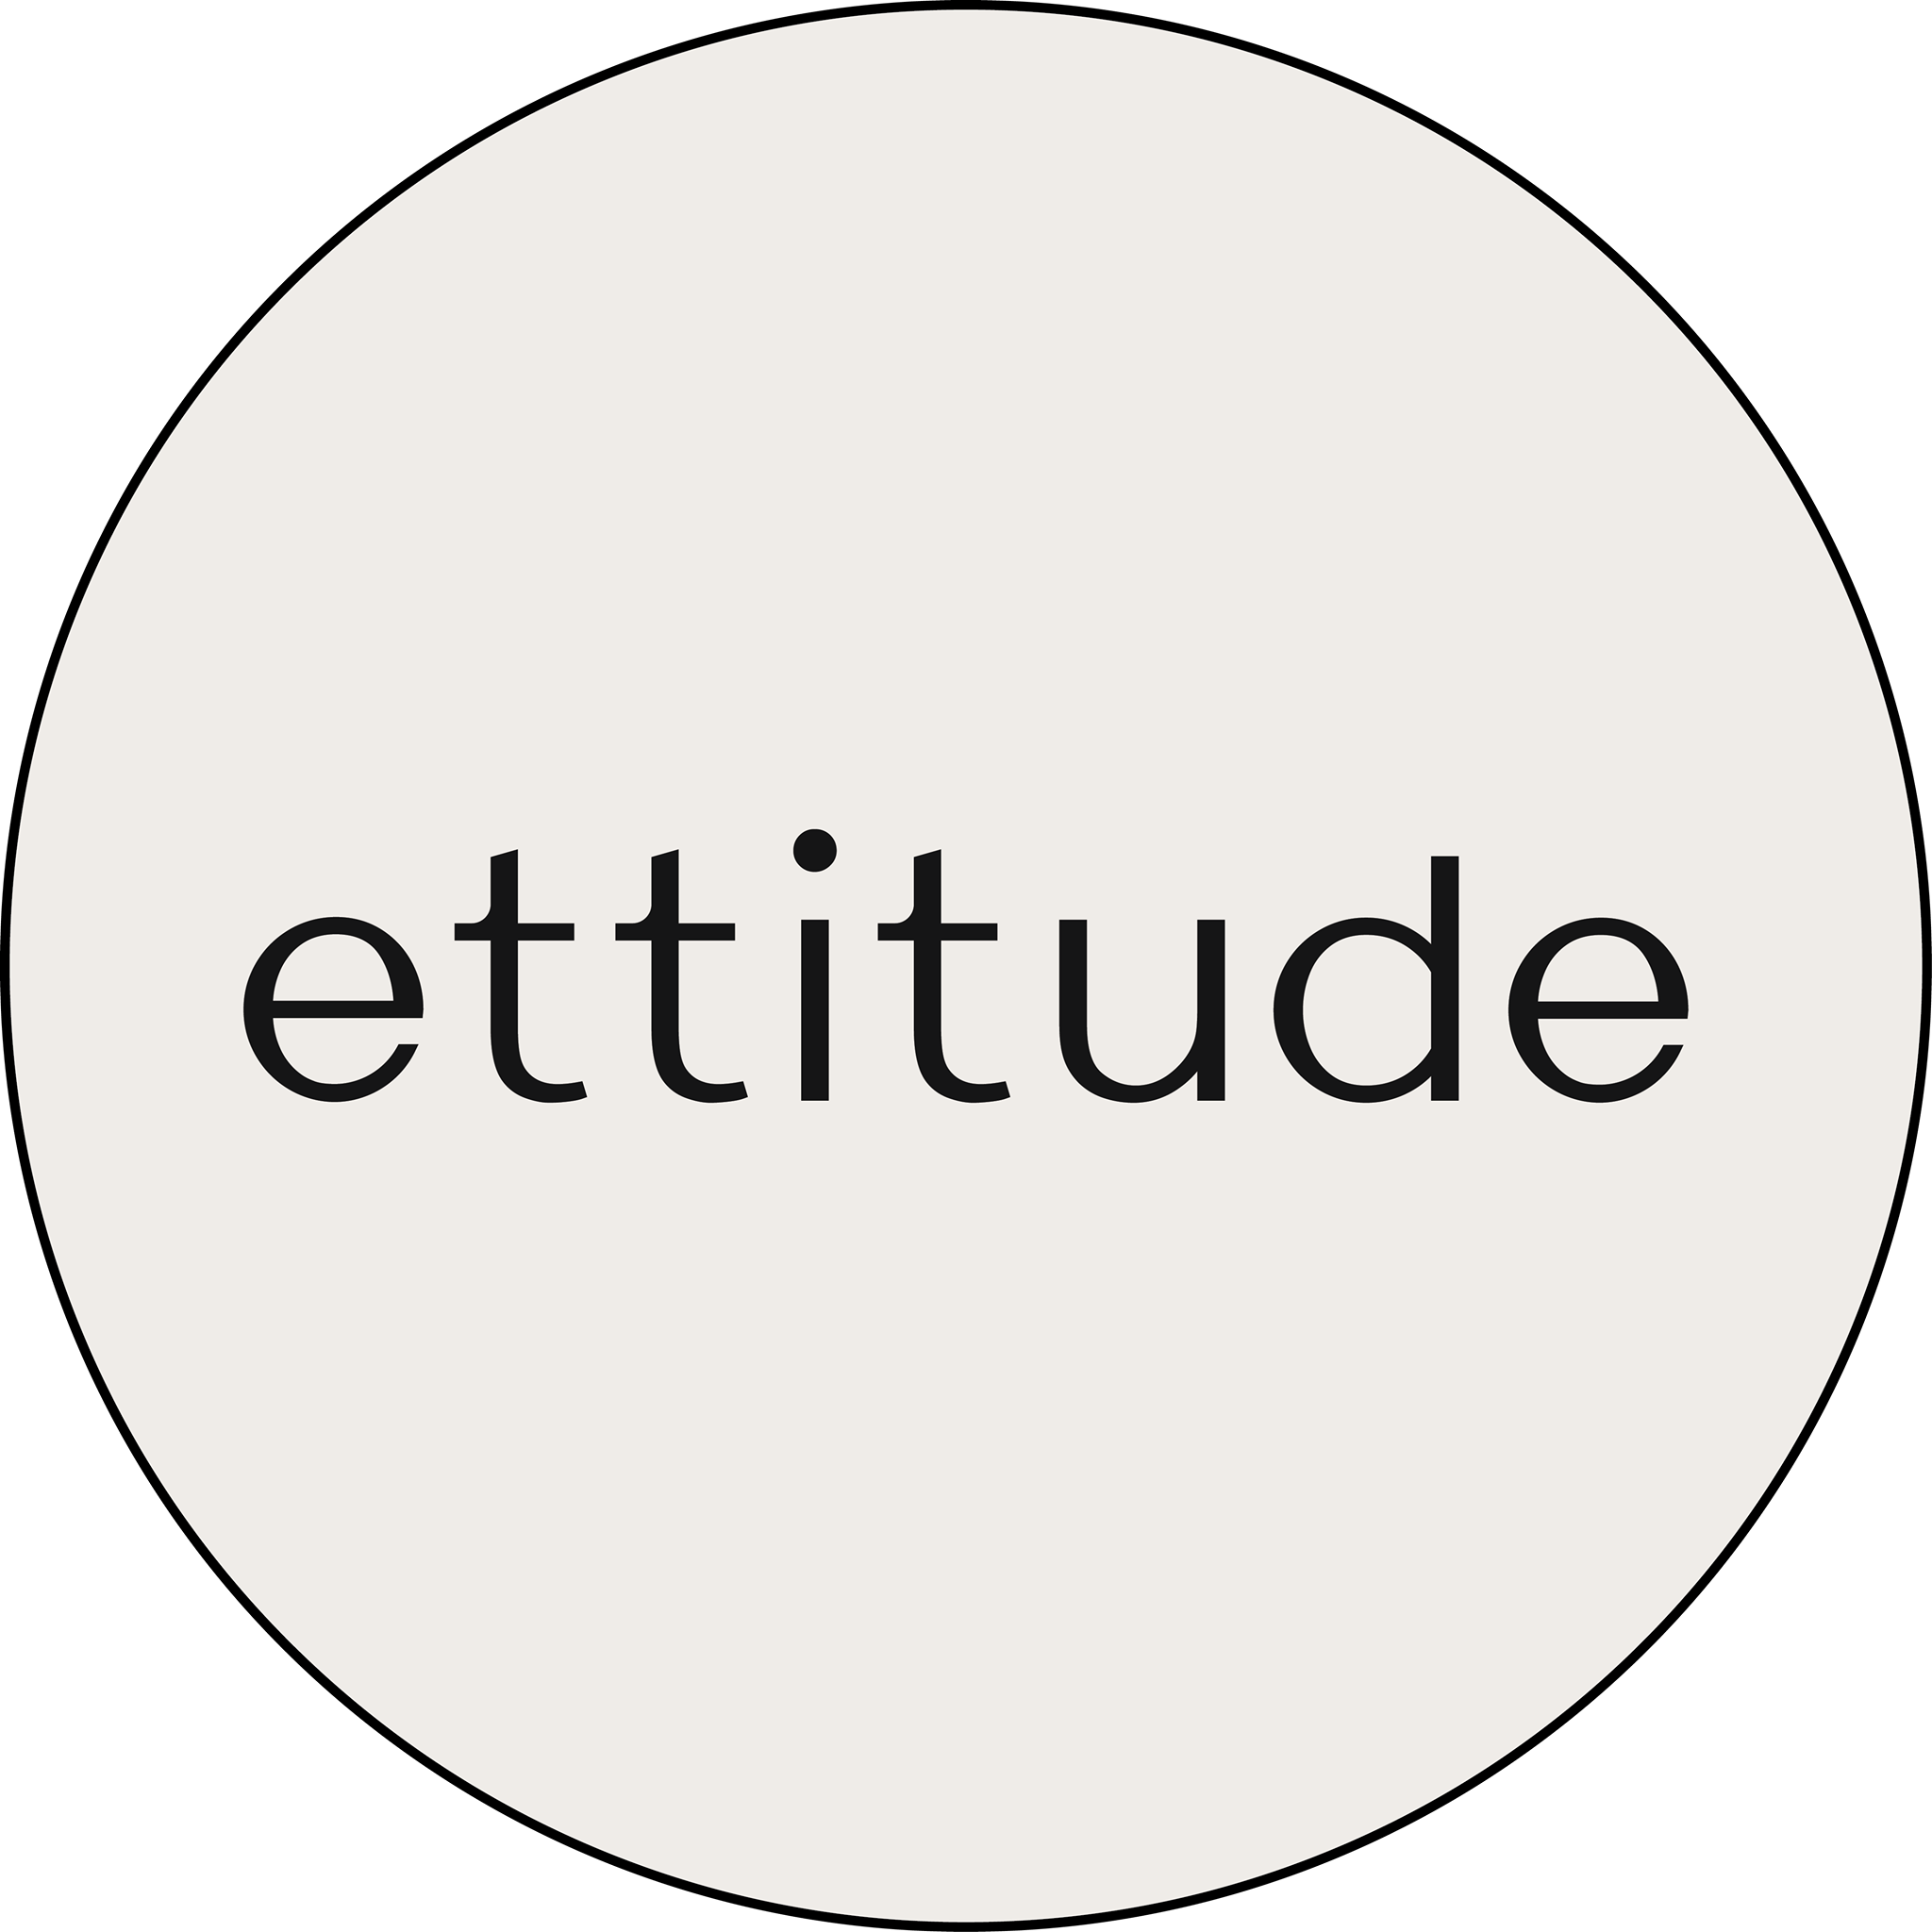 The Outstanding Company Client Ettitude Logo